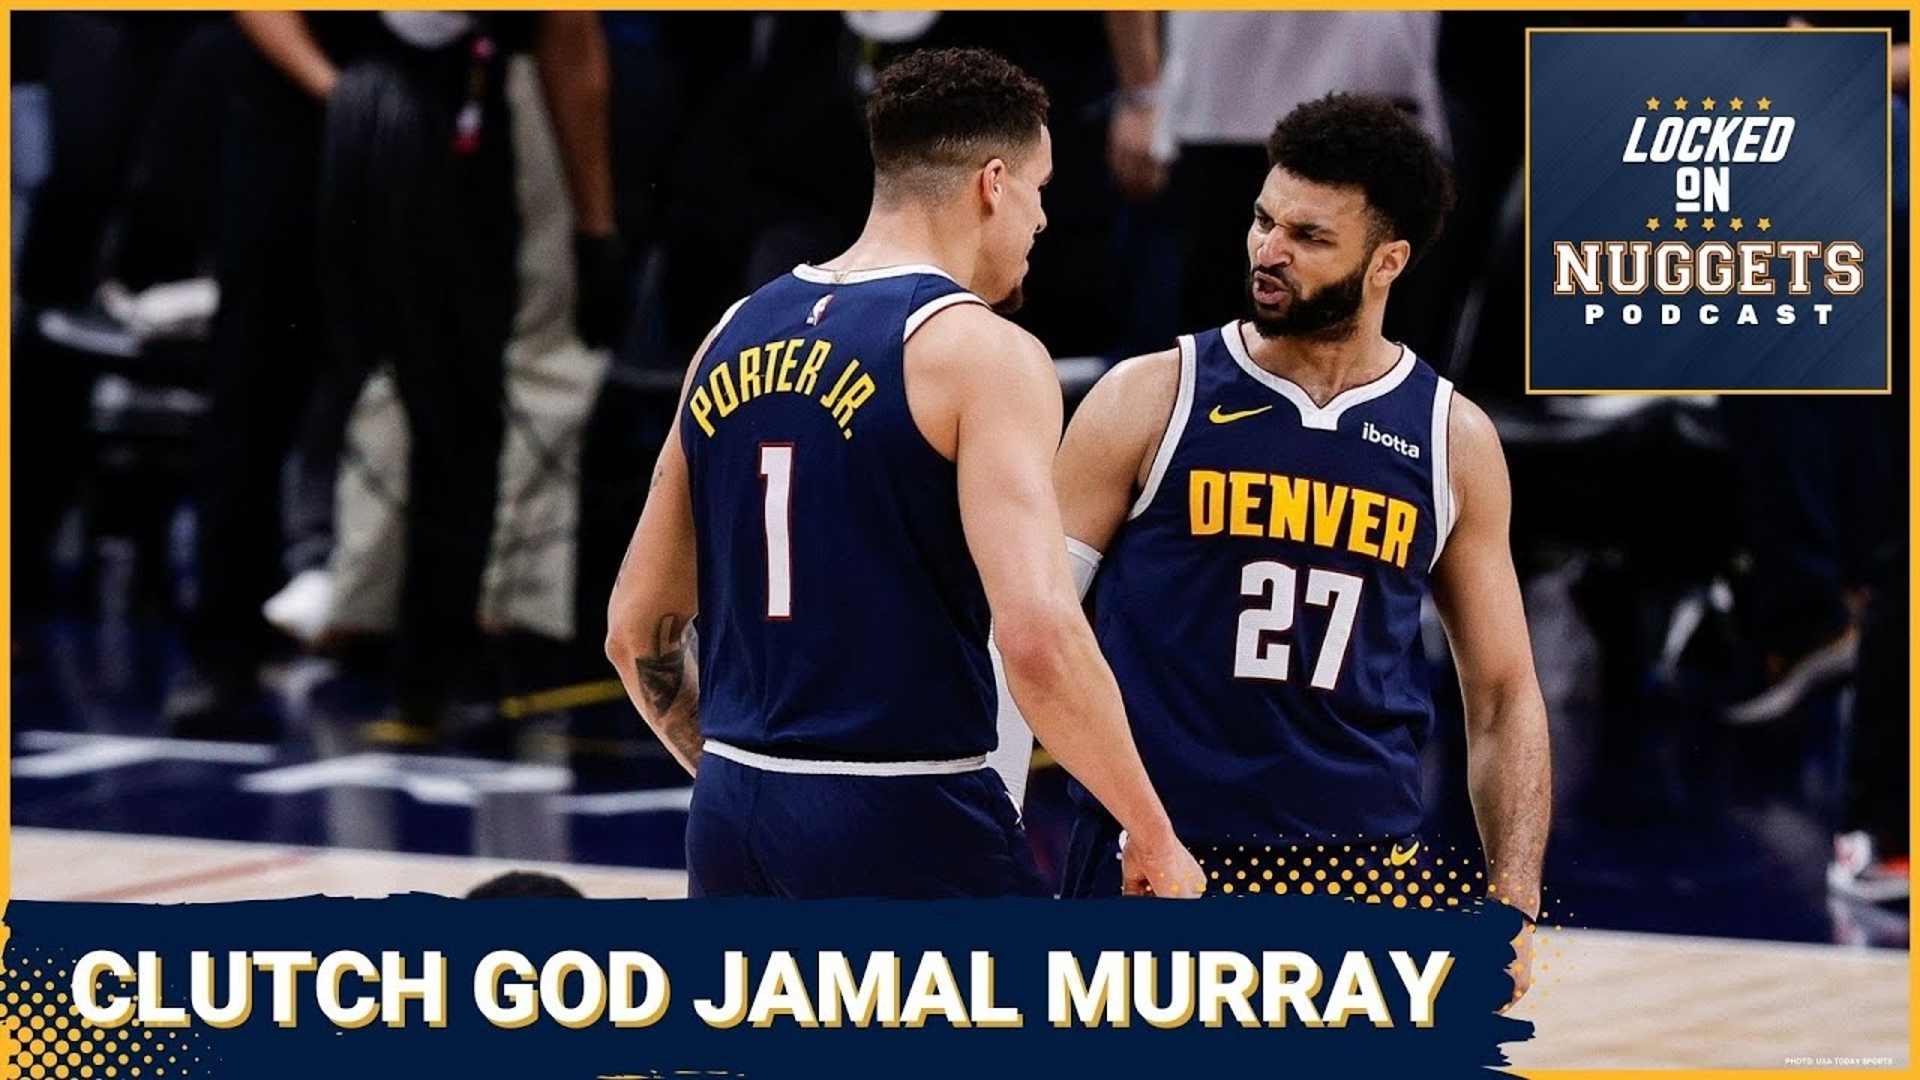 The Nuggets advance! Denver Gentleman Sweeps the Lakers behind Jamal Murray's second game winner in clutch time and will face the Wolves.